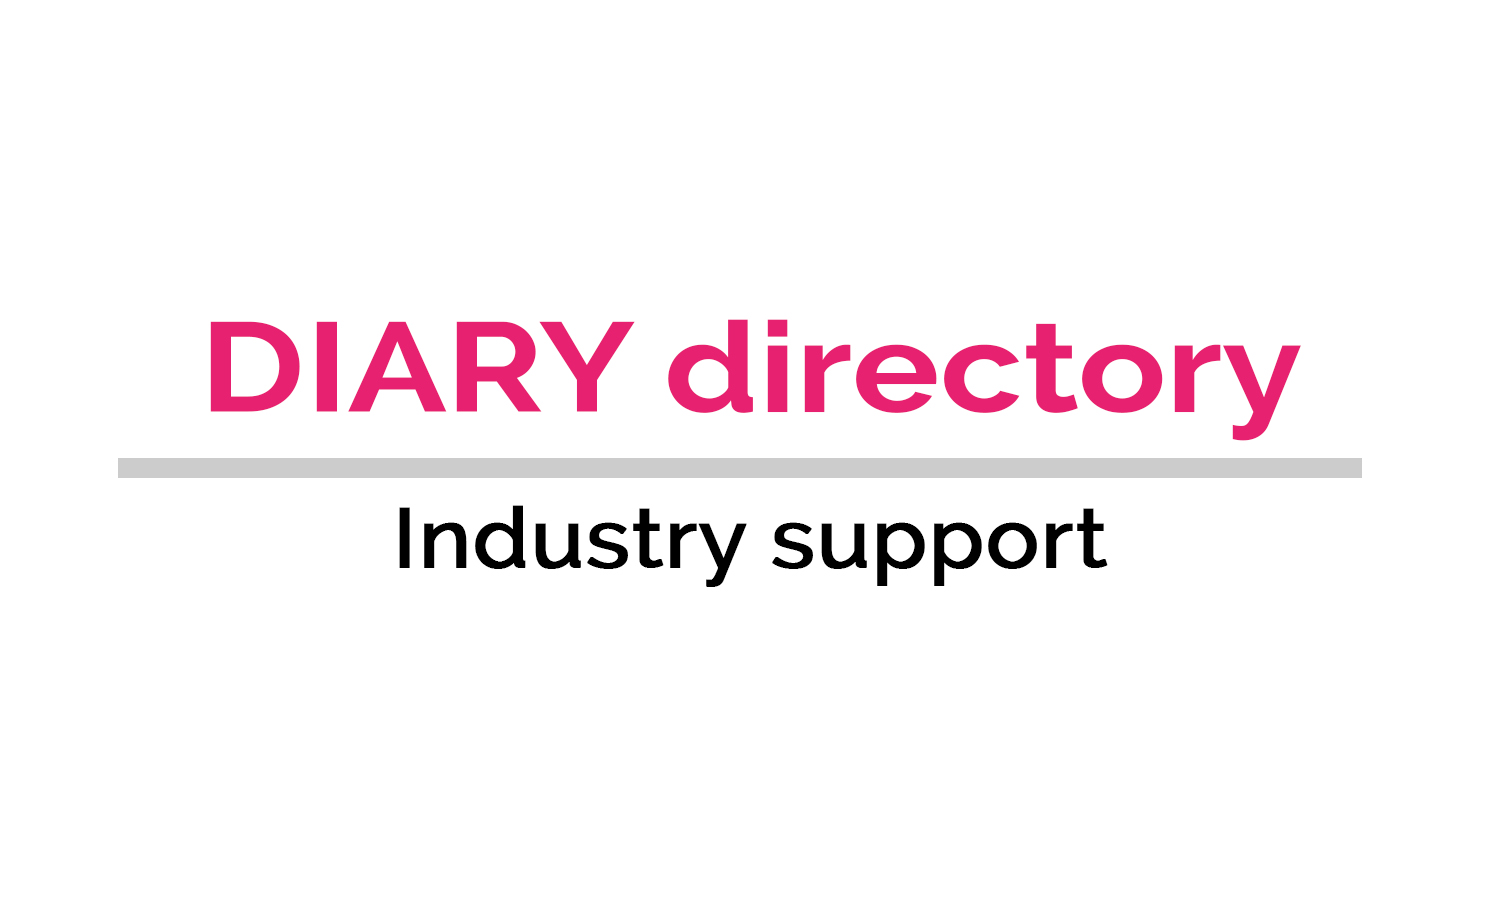 DIARY directory Industry Support